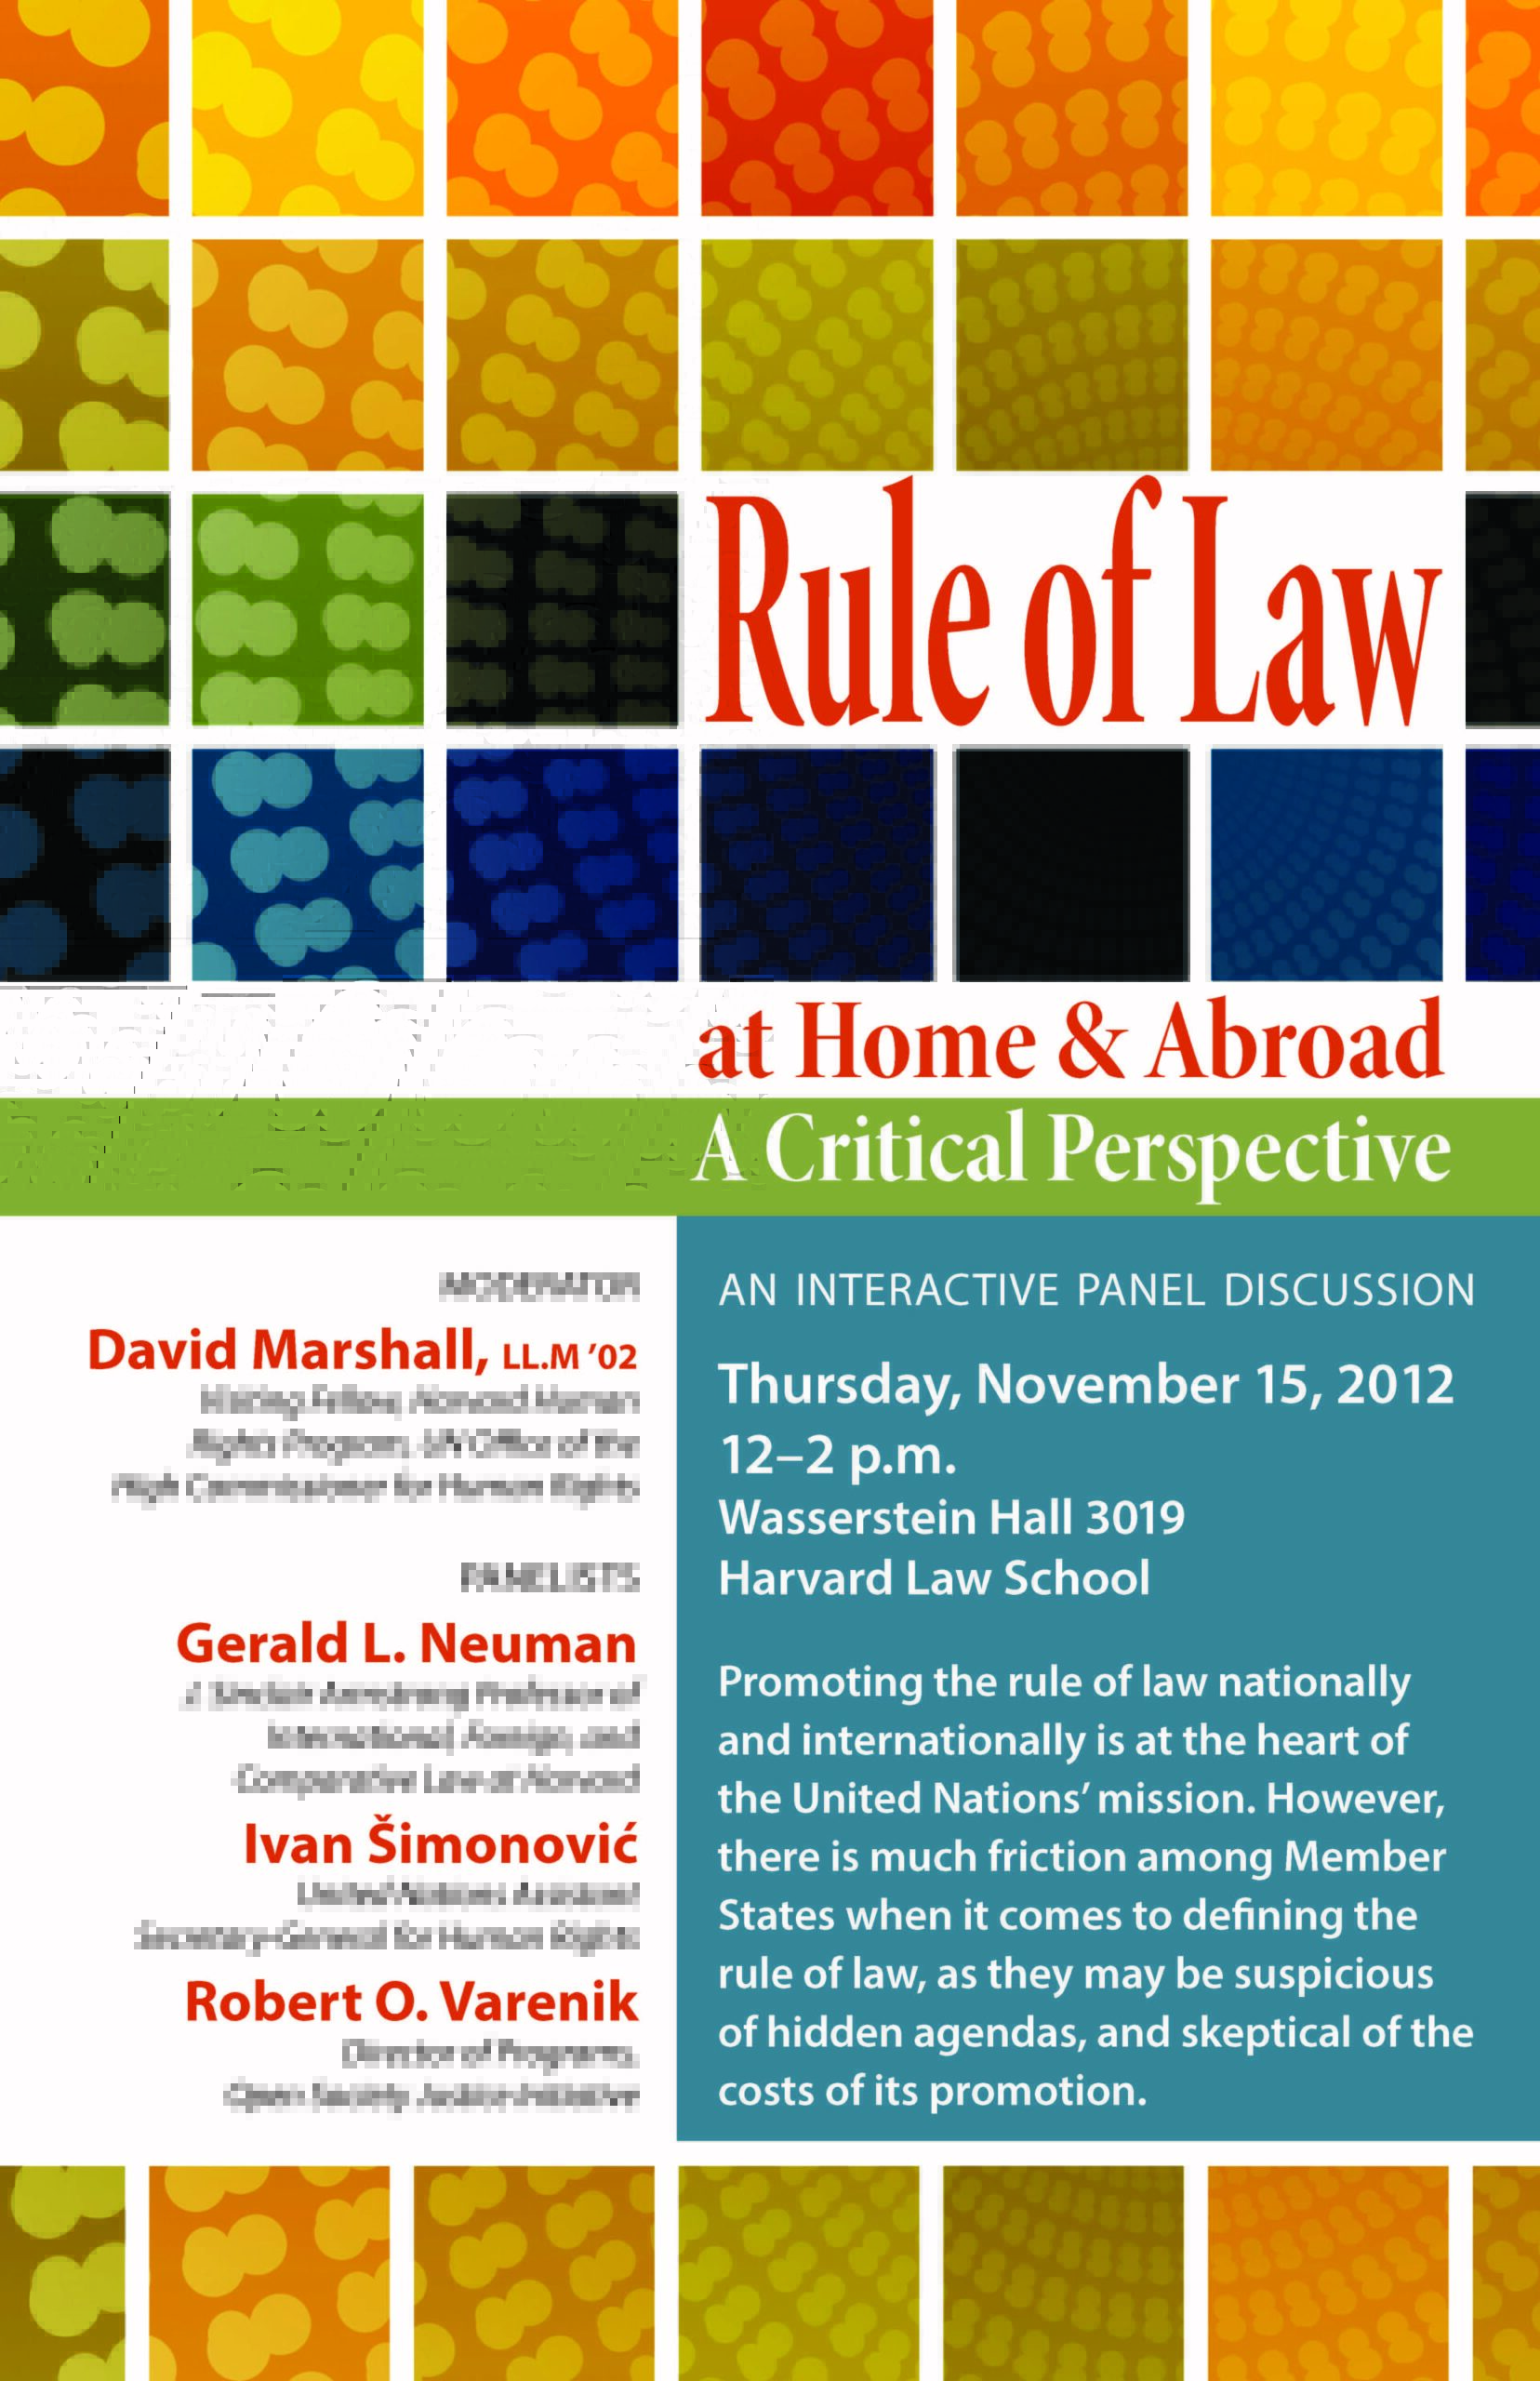 "Rule of Law: at Home & Abroad" Poster: square of various colors along with event details.